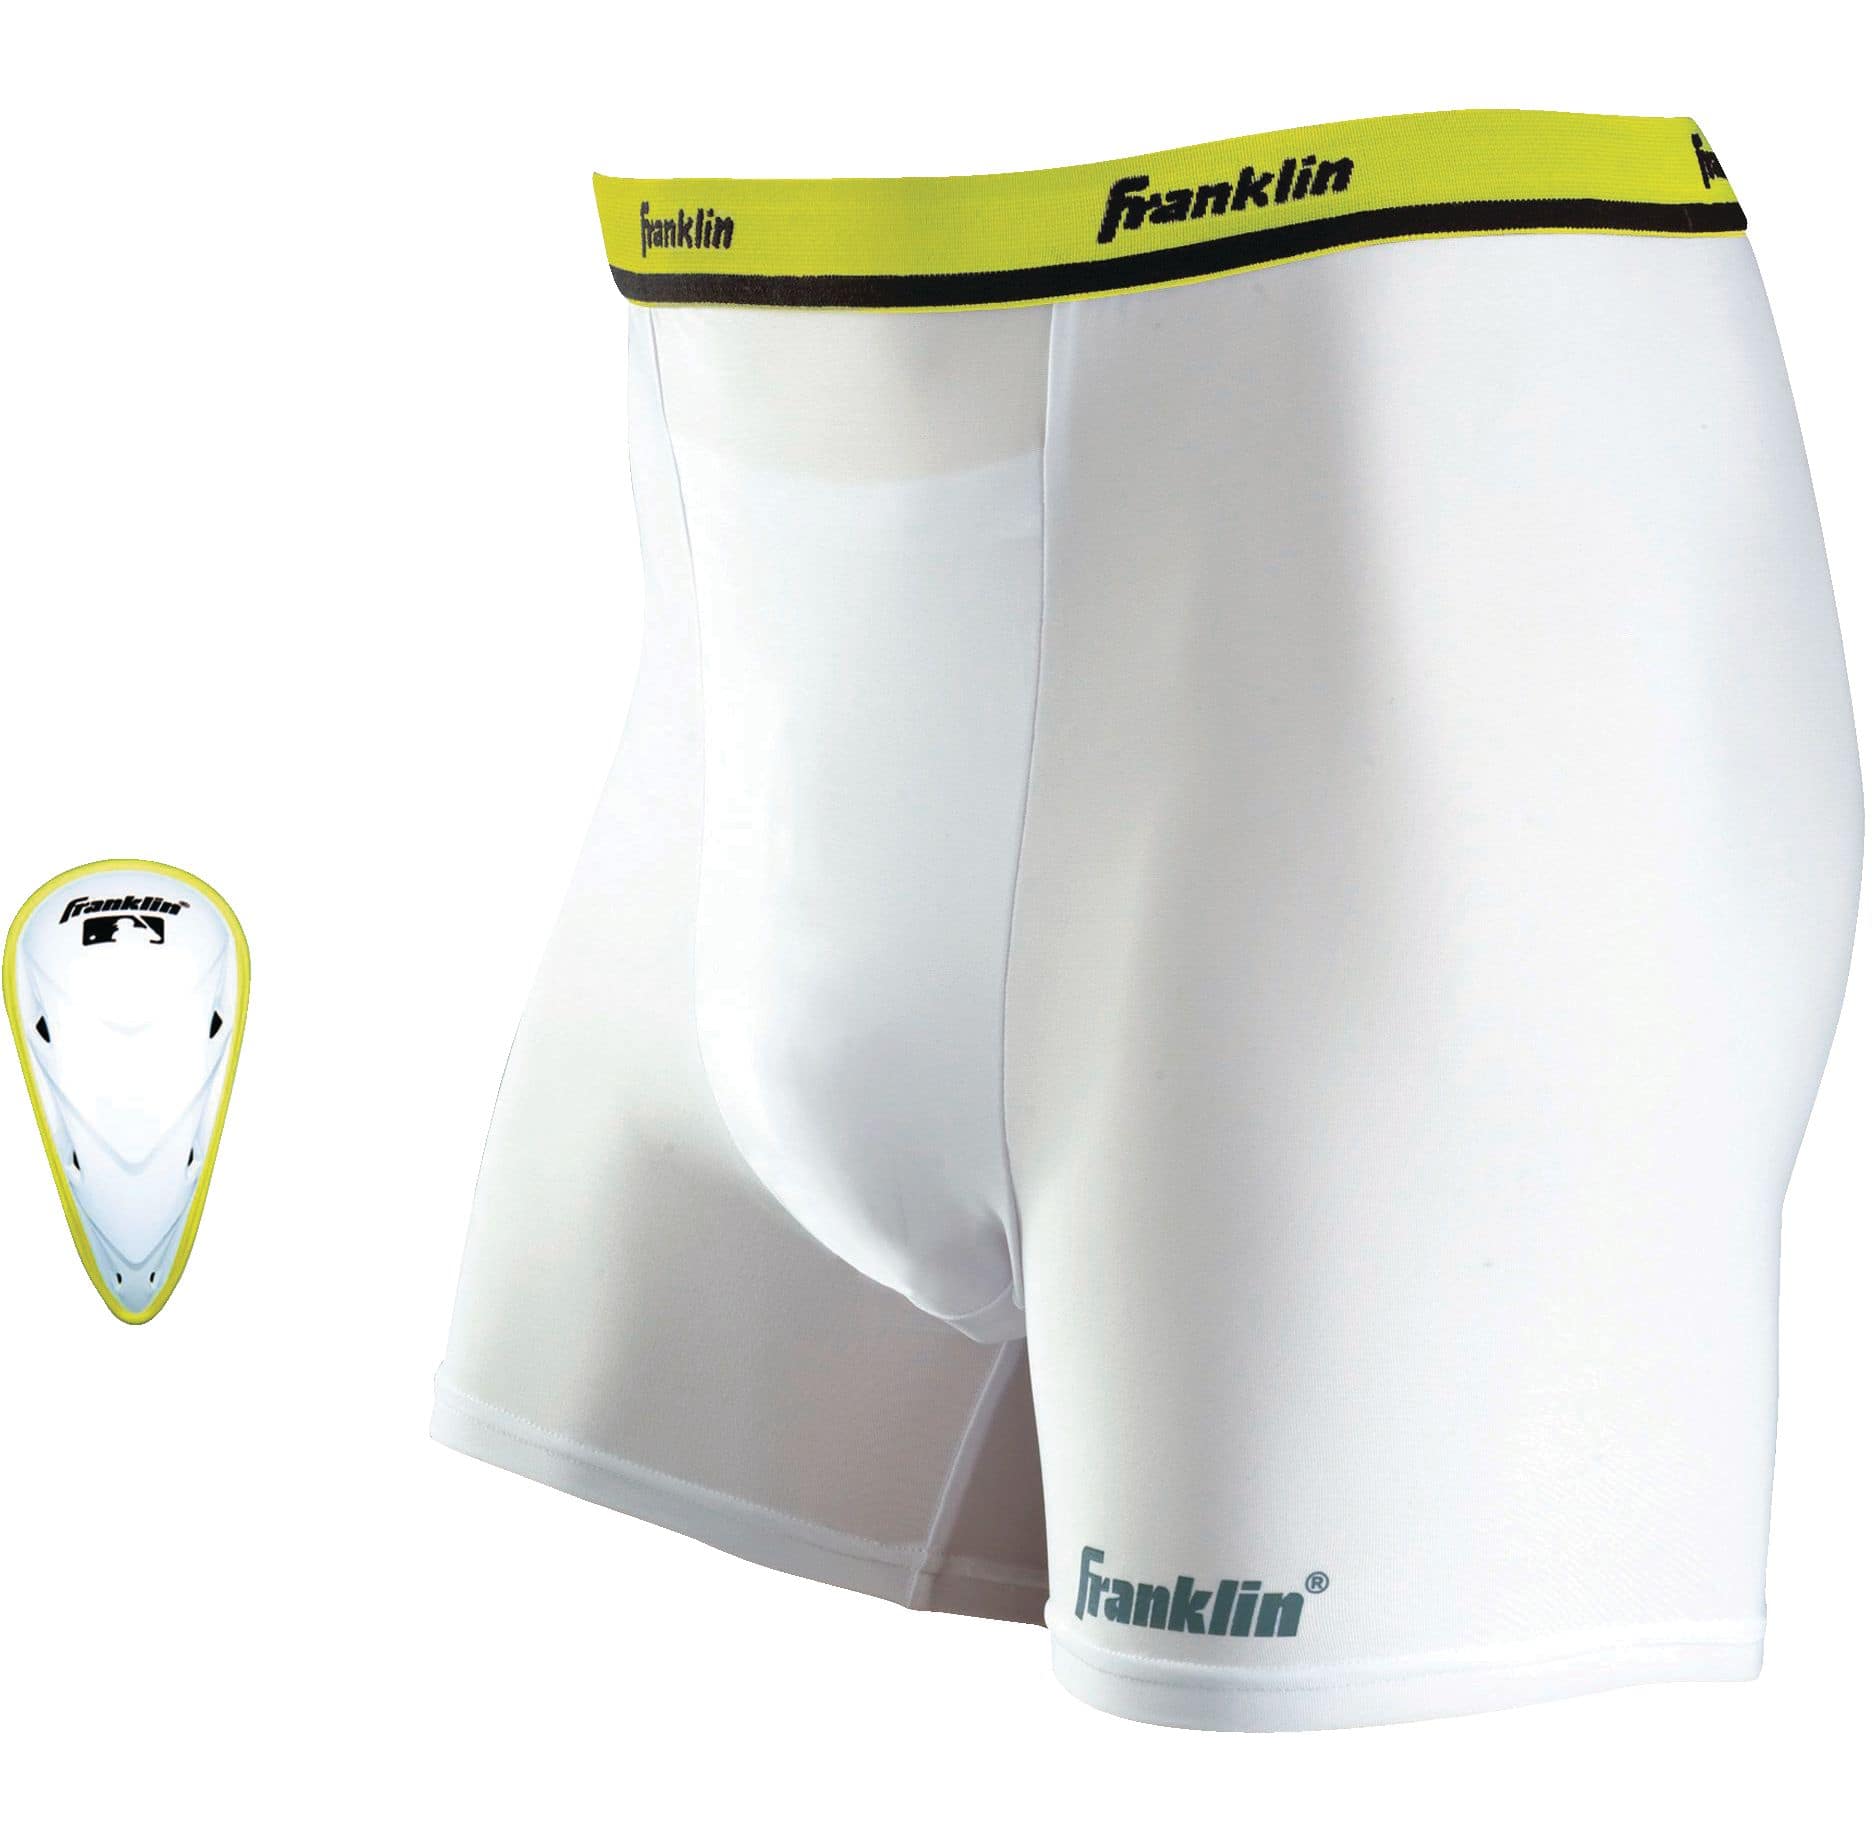 https://media-www.canadiantire.ca/product/playing/team-sports-and-golf/sports-equipment-accessories/0804585/franklin-adult-flexpro-cup-compression-shorts-medium-849841e9-be81-49cf-808d-8595676b79b2-jpgrendition.jpg